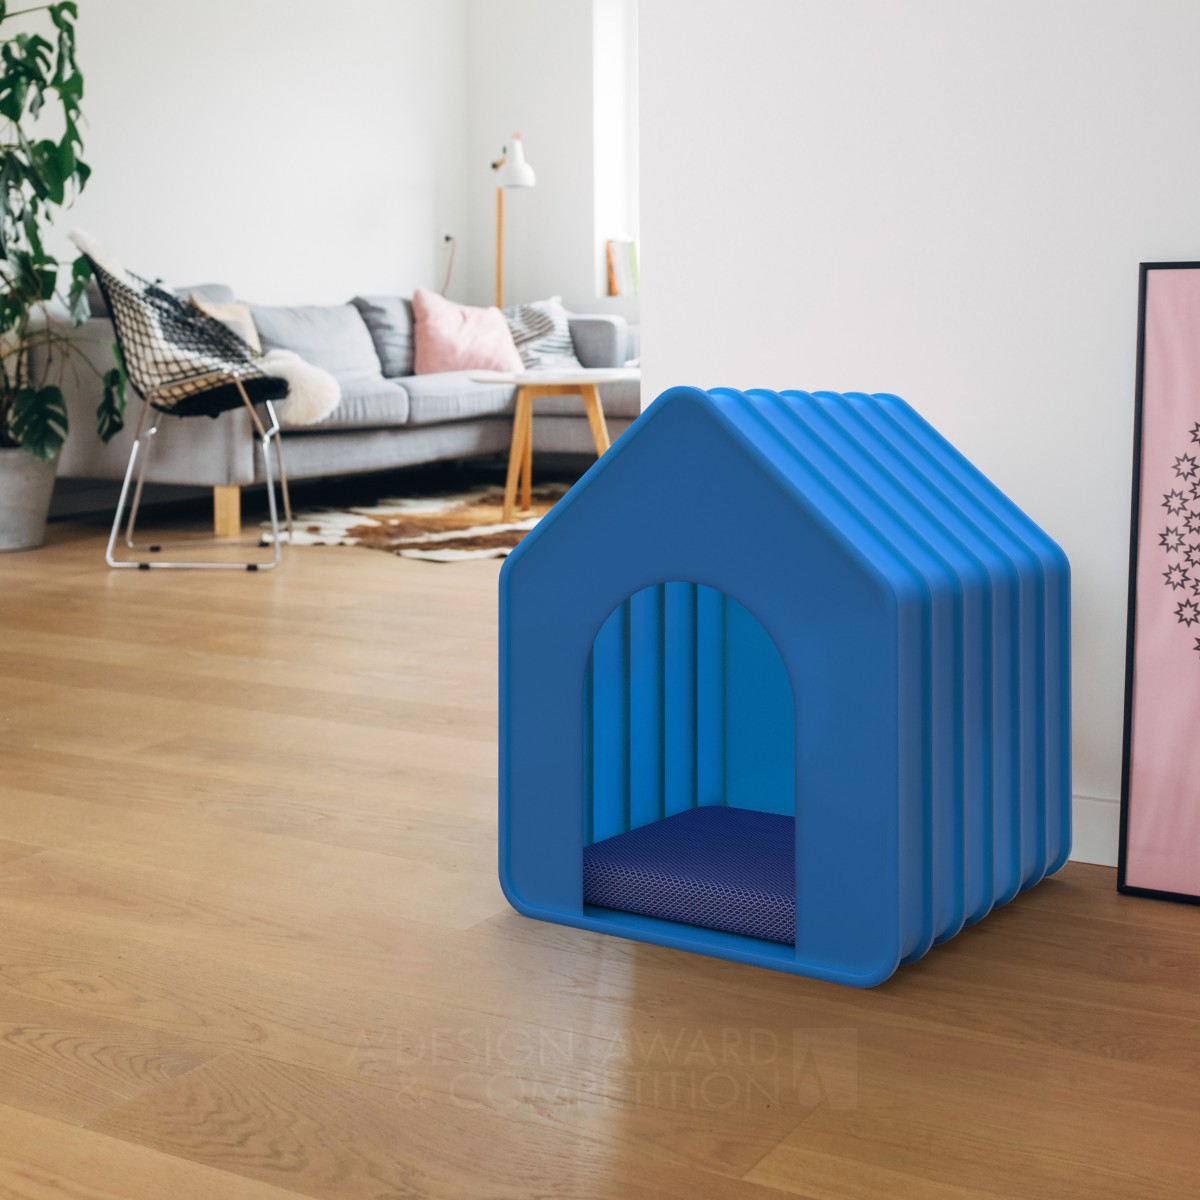 Accordio: The Collapsible Pet House